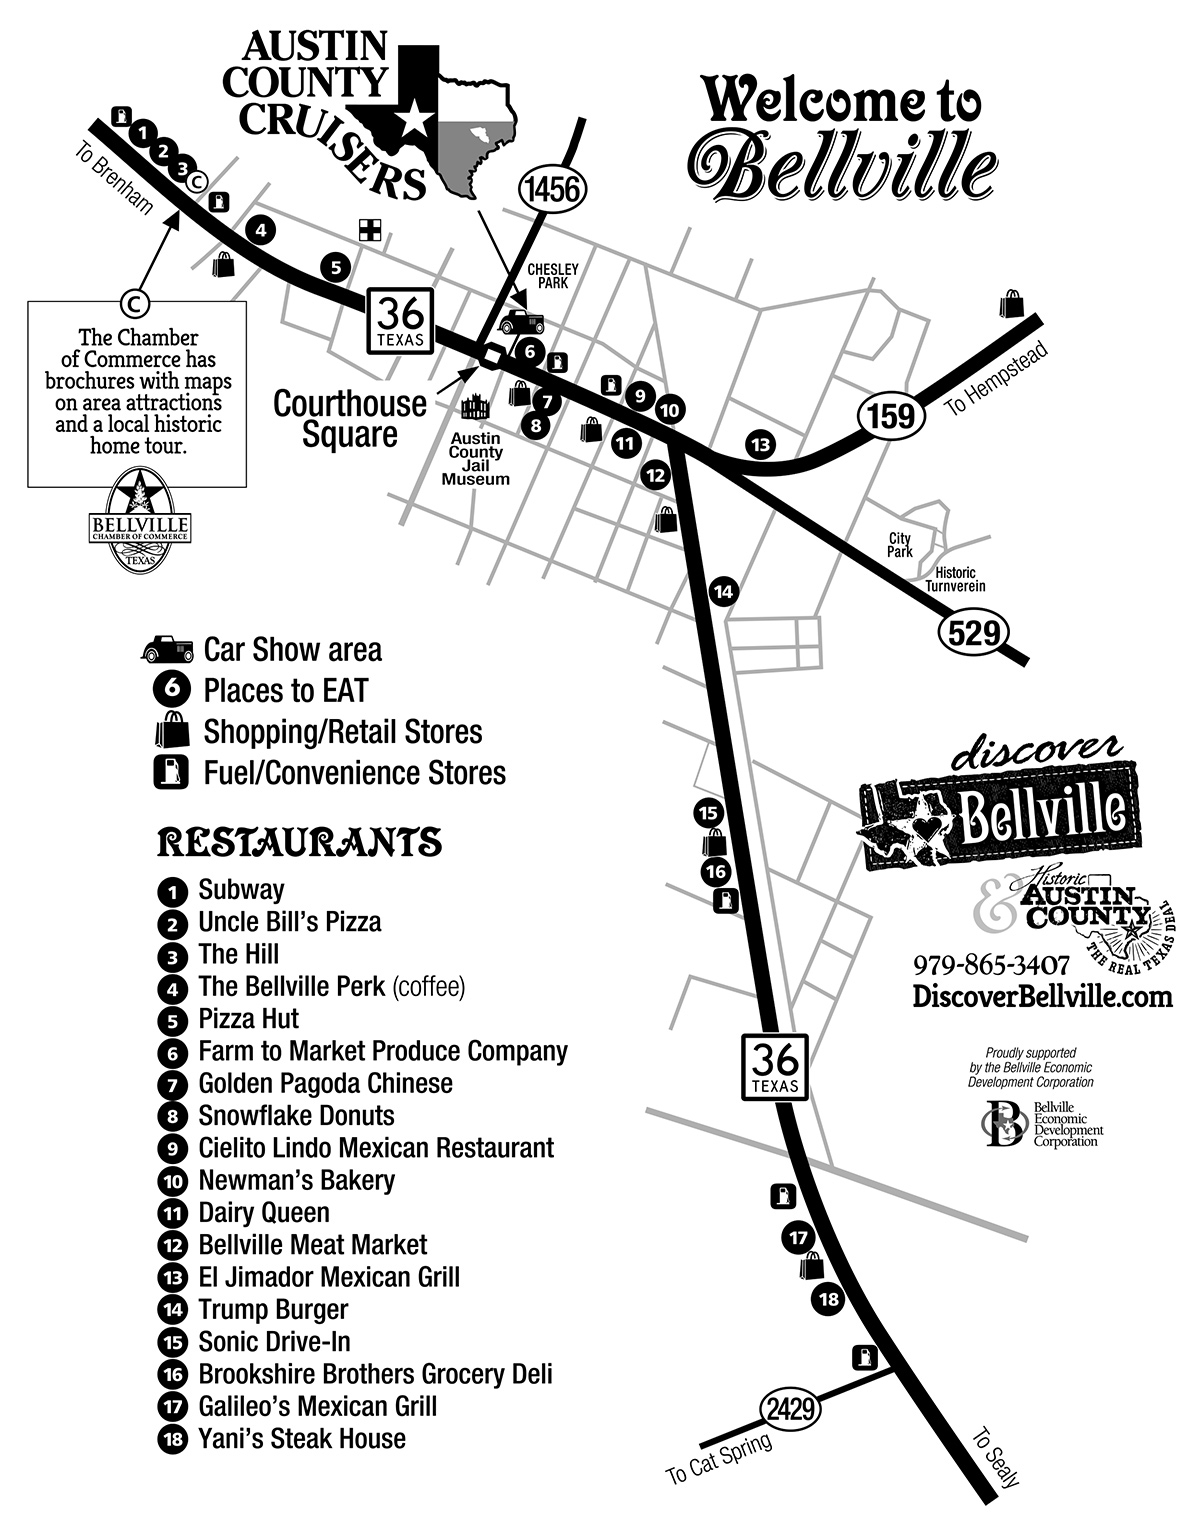 Austin County Cruisers - Bellville Map